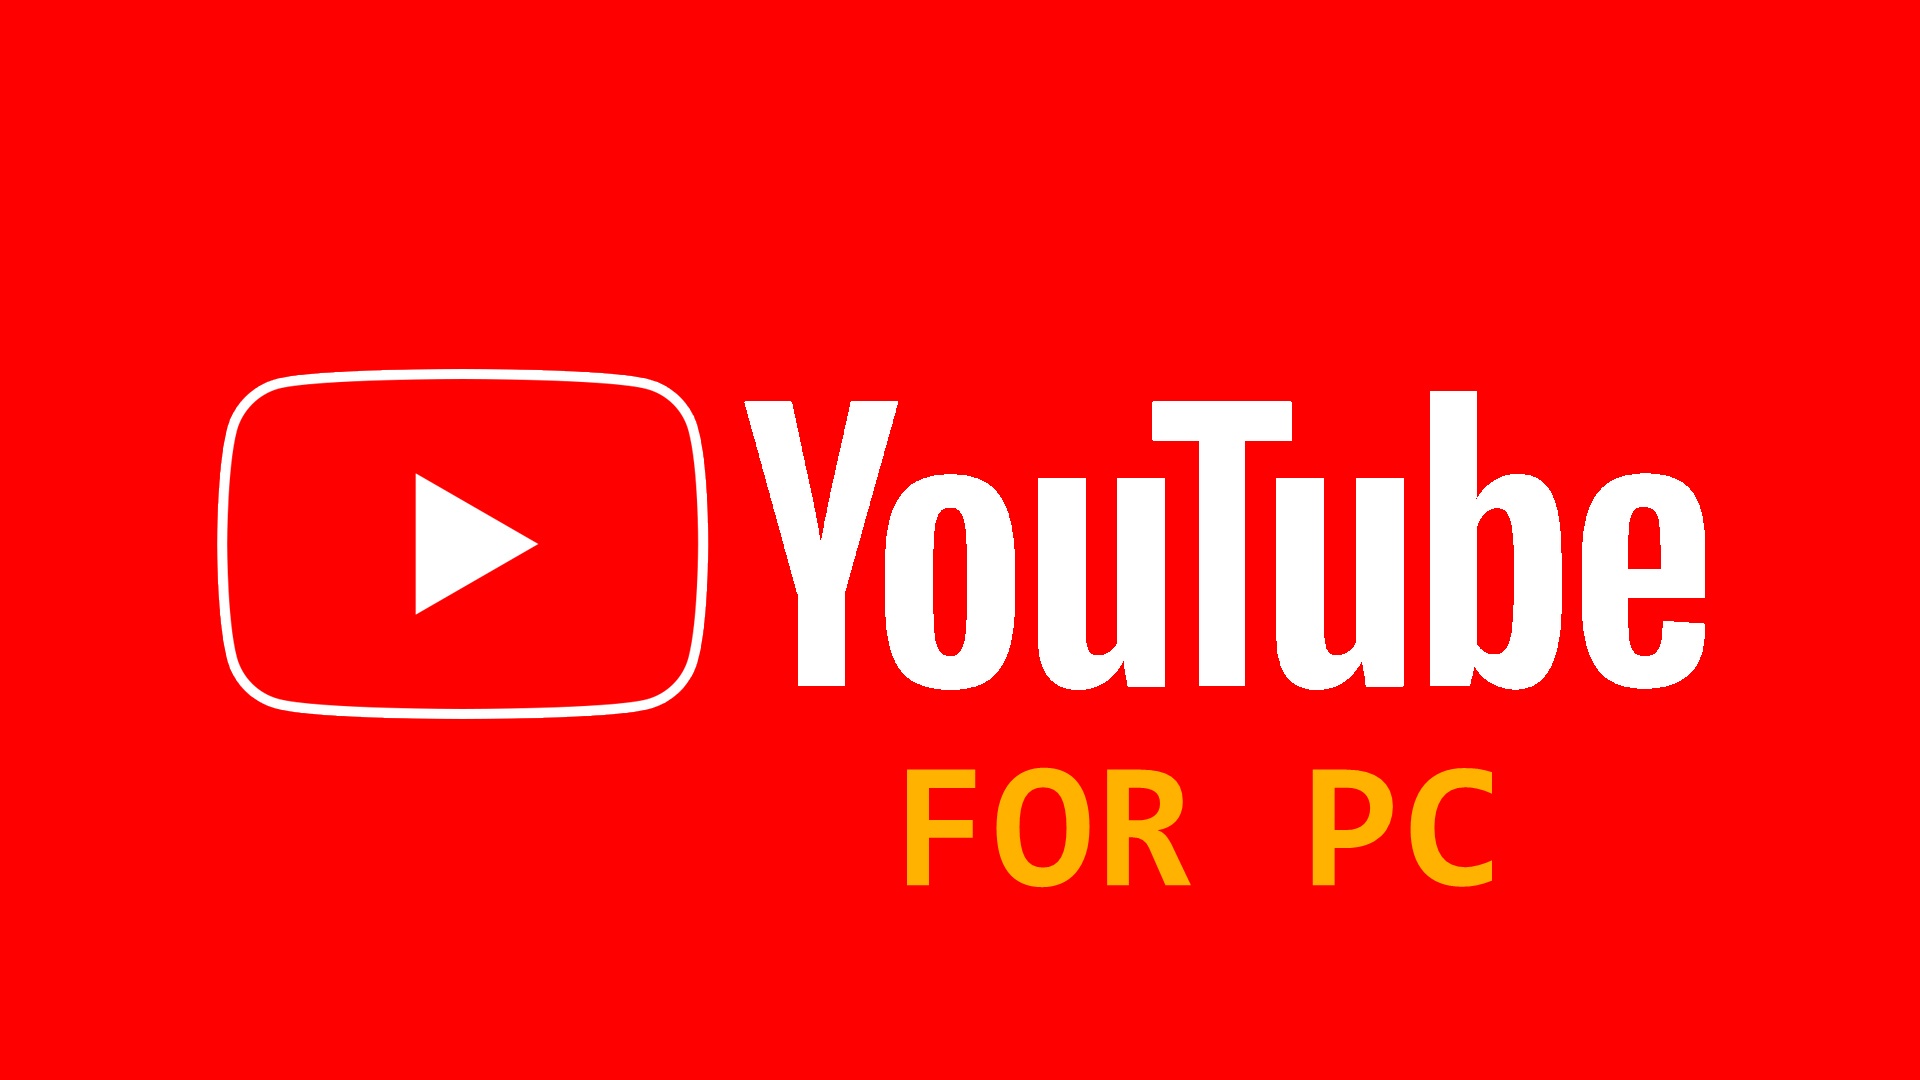 download youtube app for pc windows 7 old version